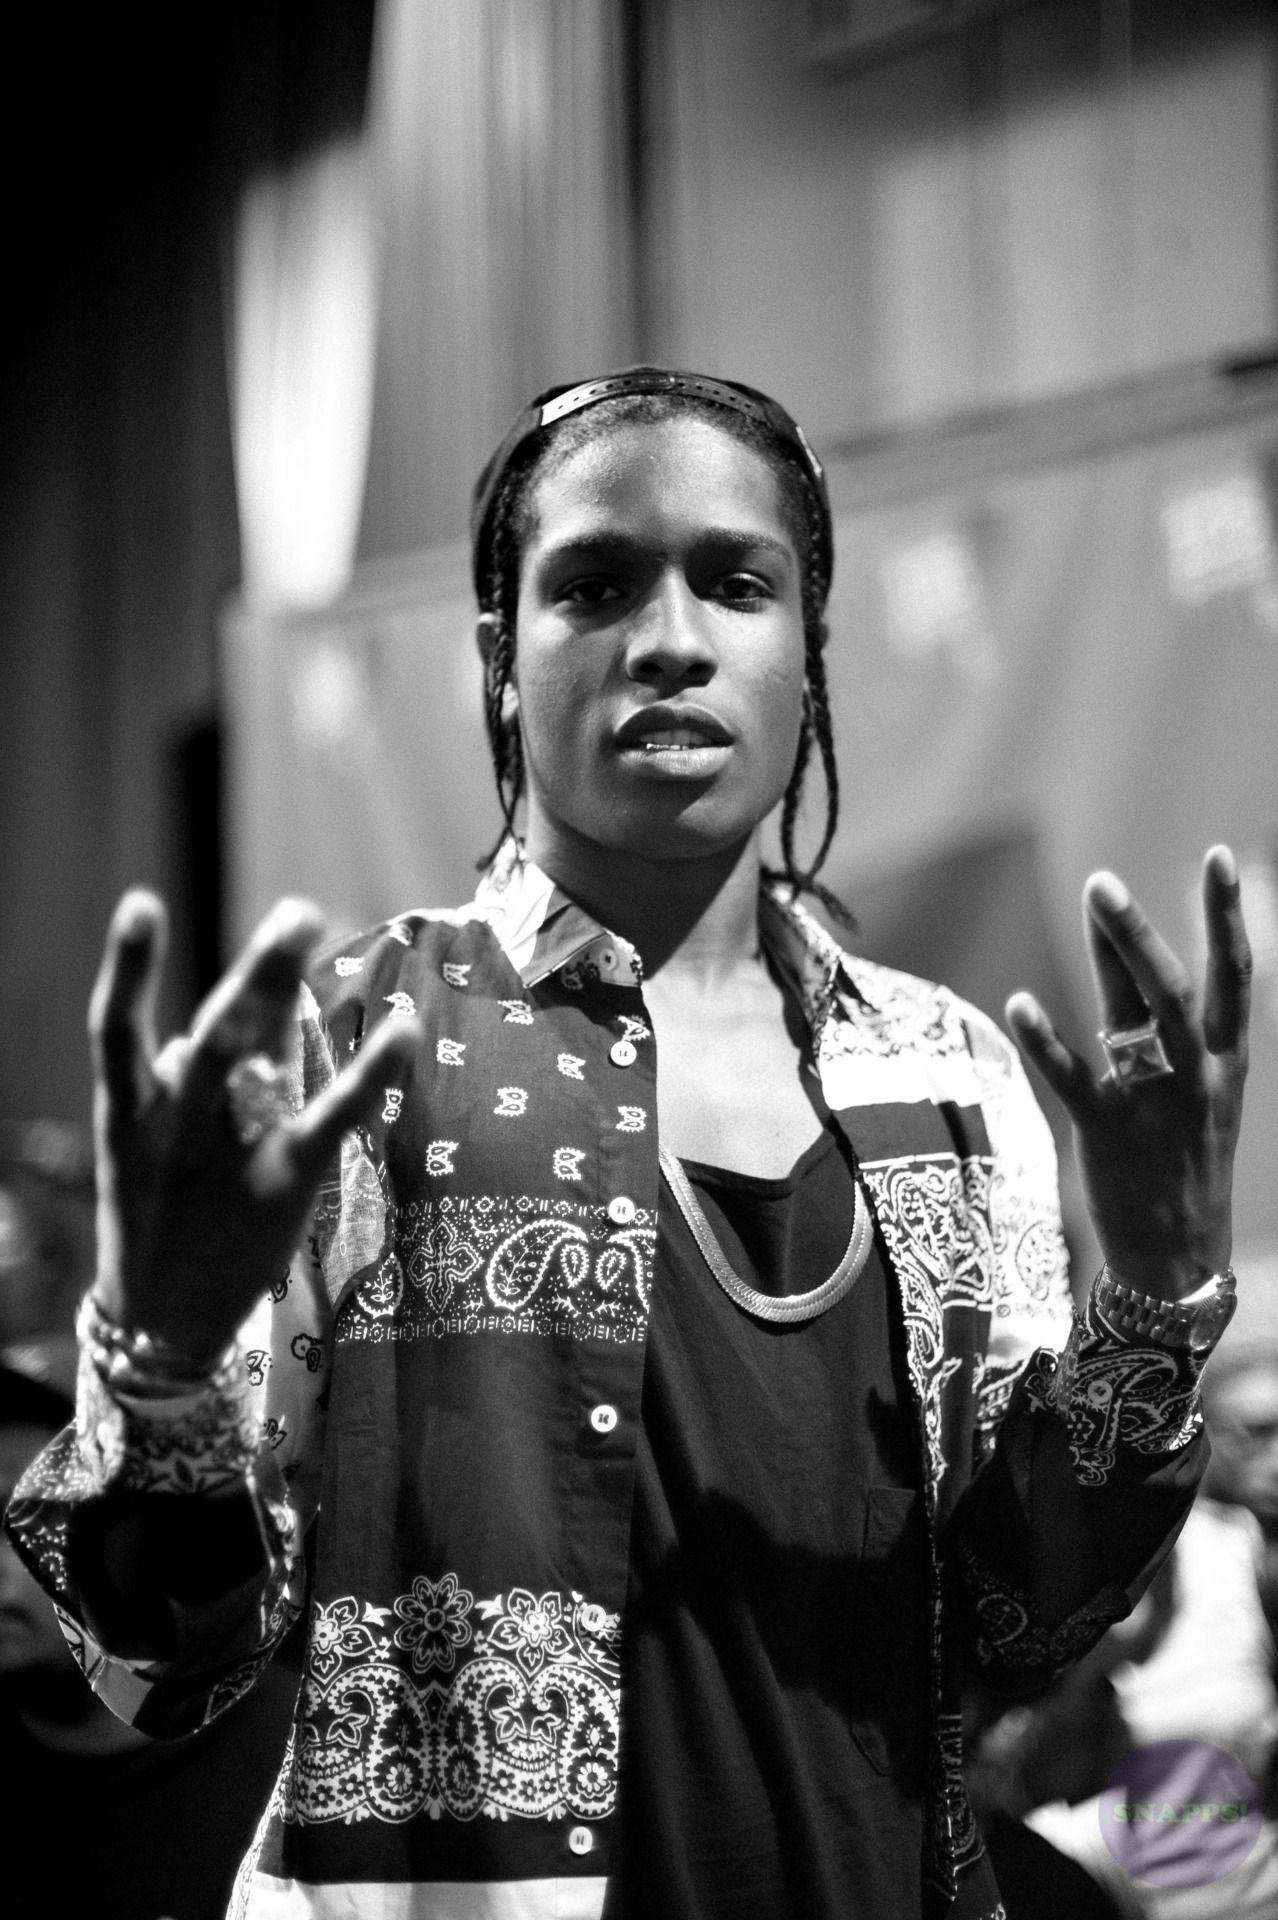 1278x1920 Asap Rocky Wallpapers for Iphone 7, Iphone 7 plus, Iphone 6 plus